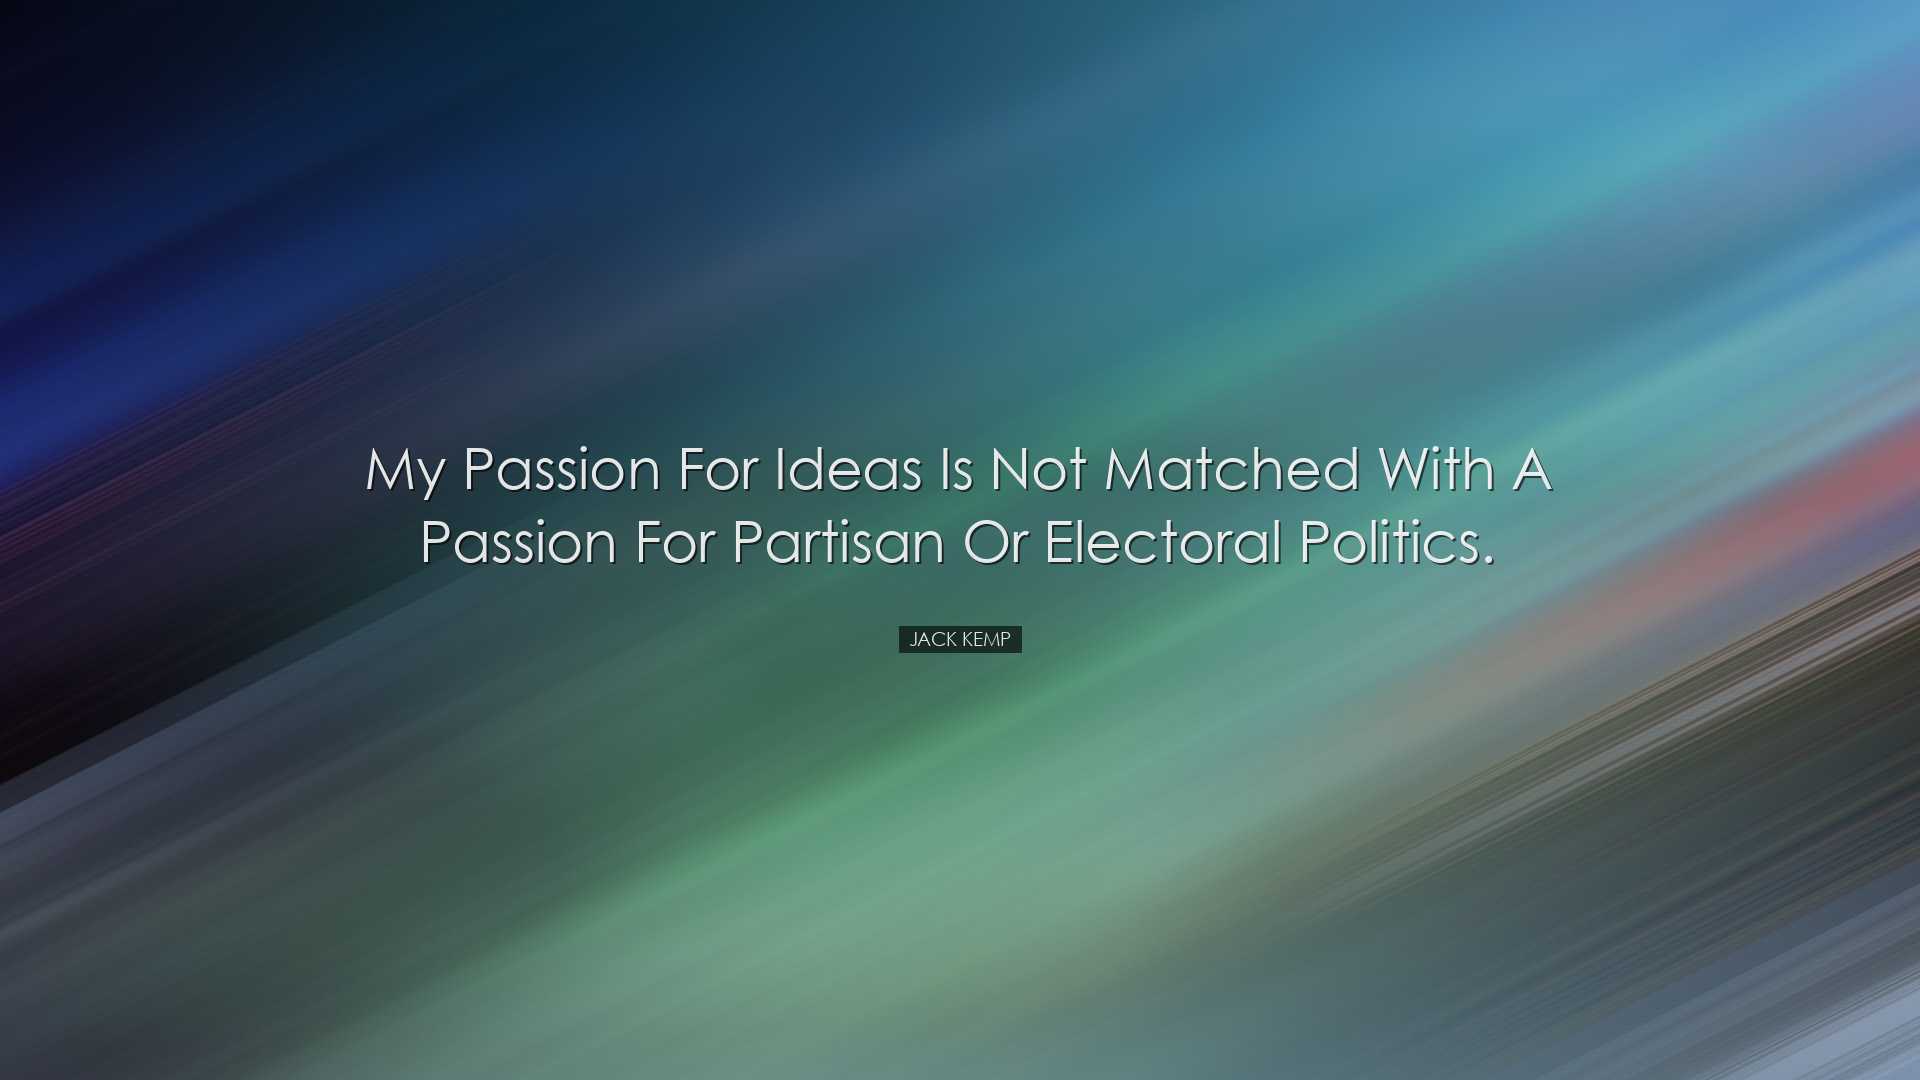 My passion for ideas is not matched with a passion for partisan or